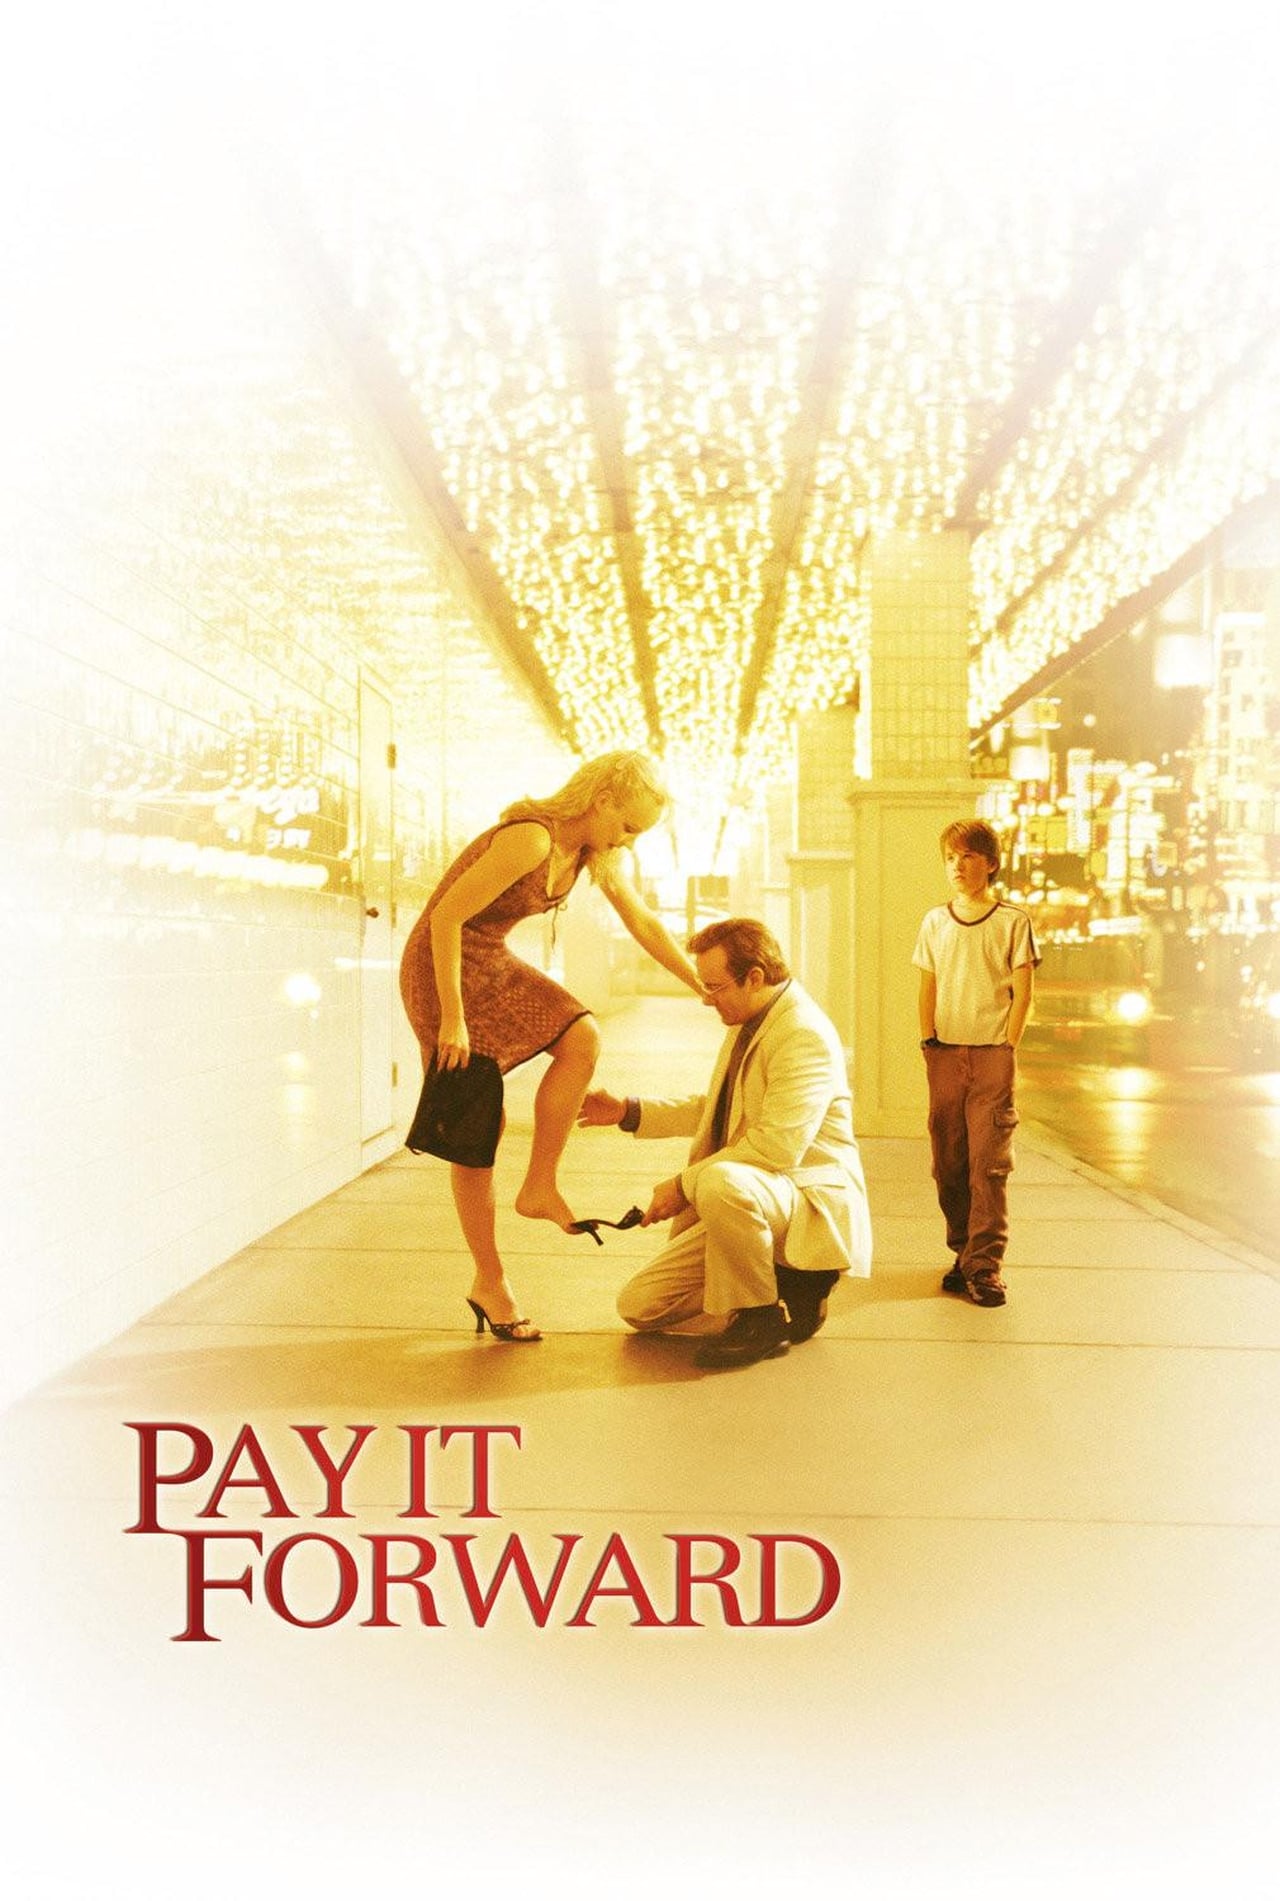 How to create a pay it forward mindset in business?